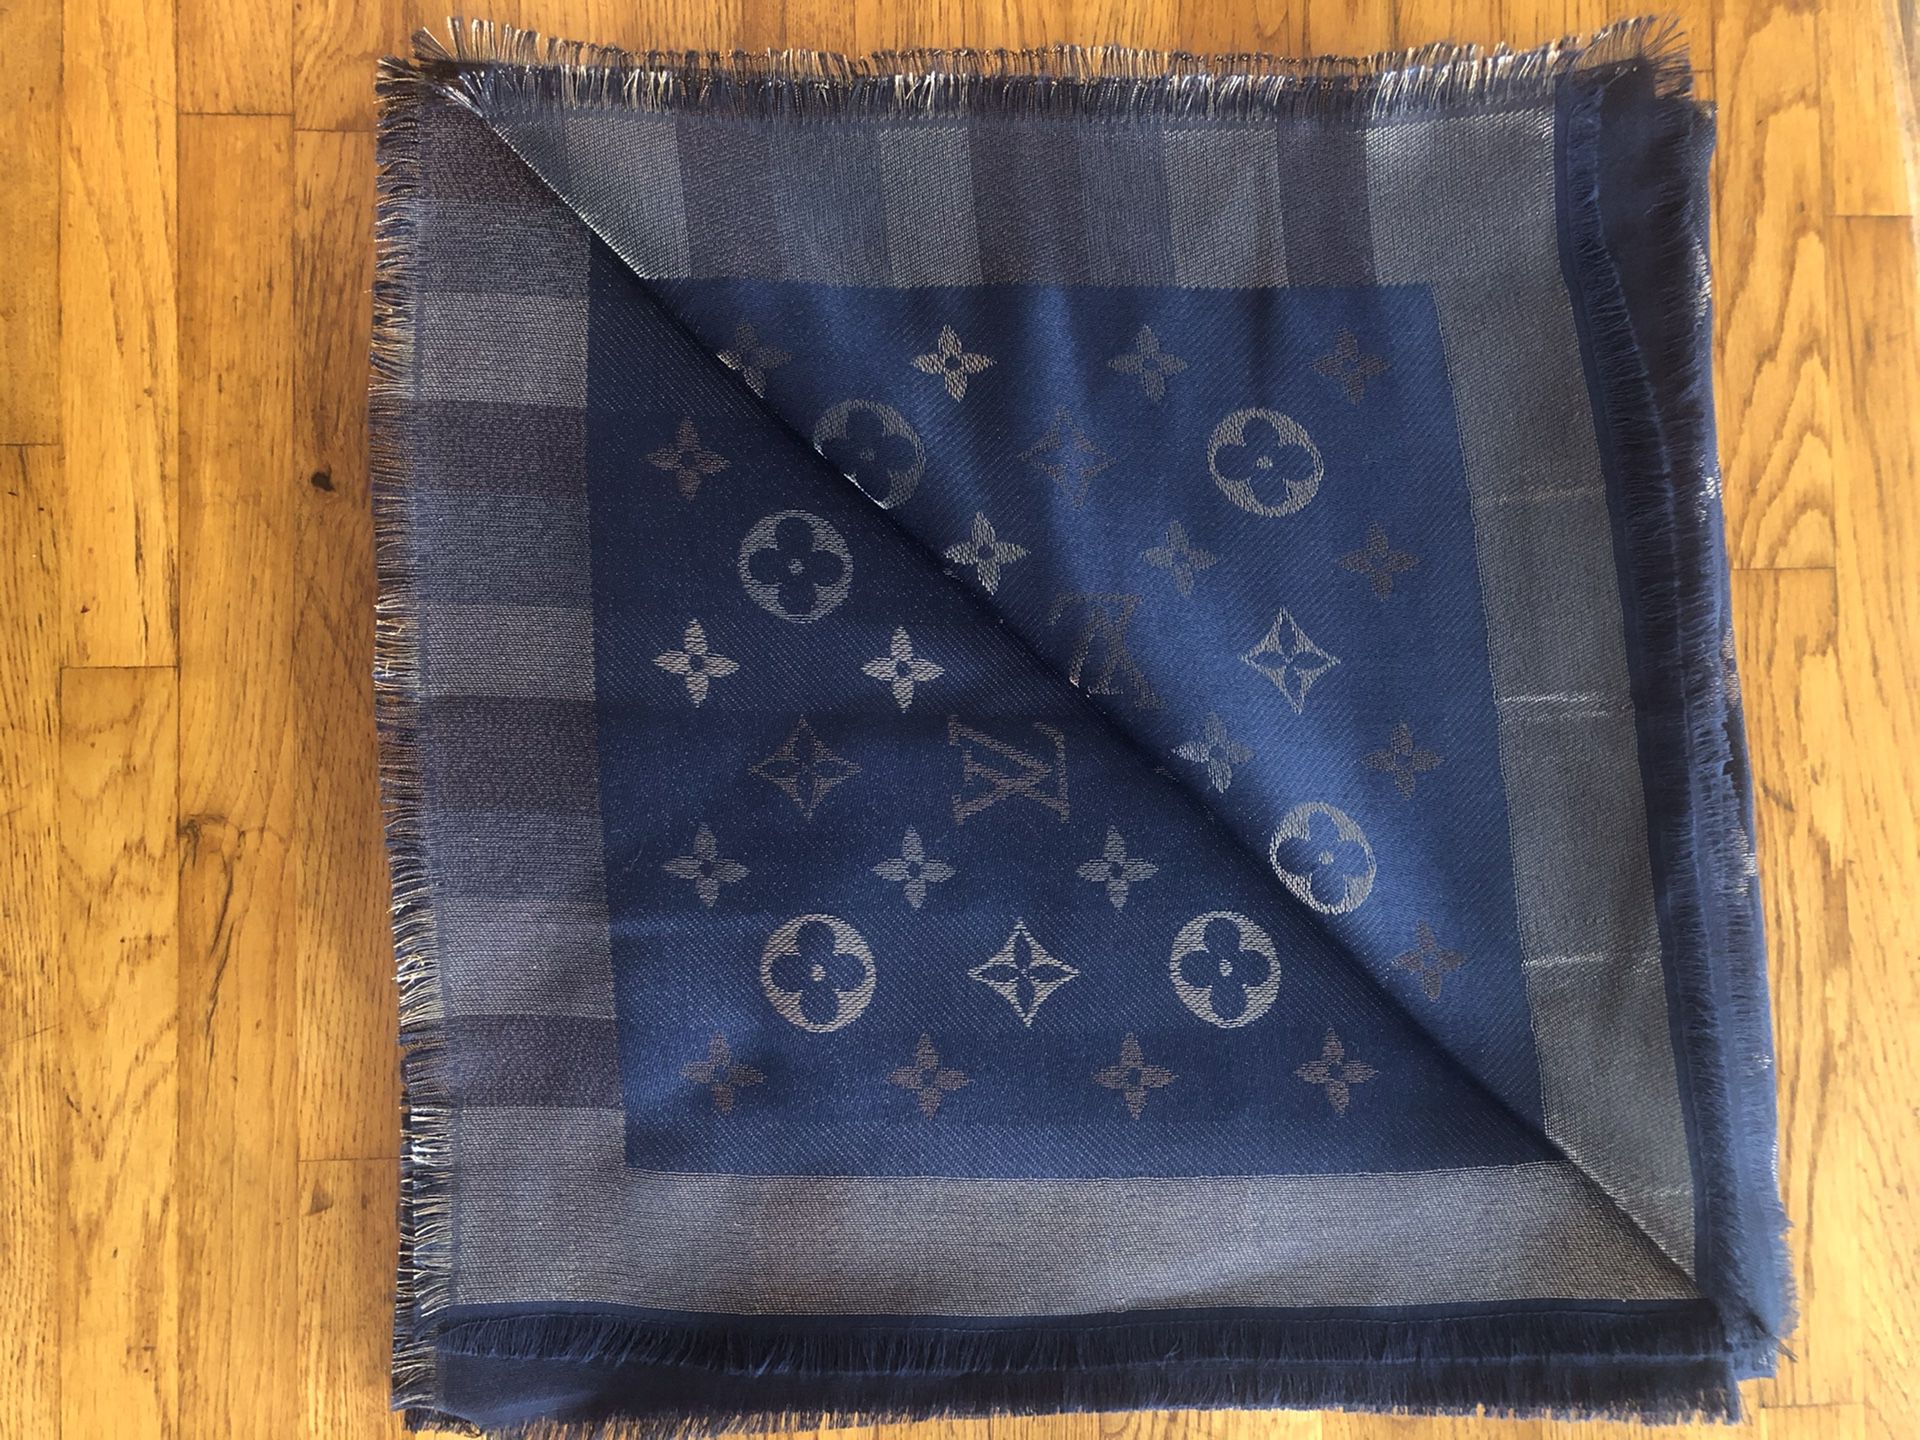 LV Monogram Shawl/Scarf Louis Vuitton Navy blue  New with tag 